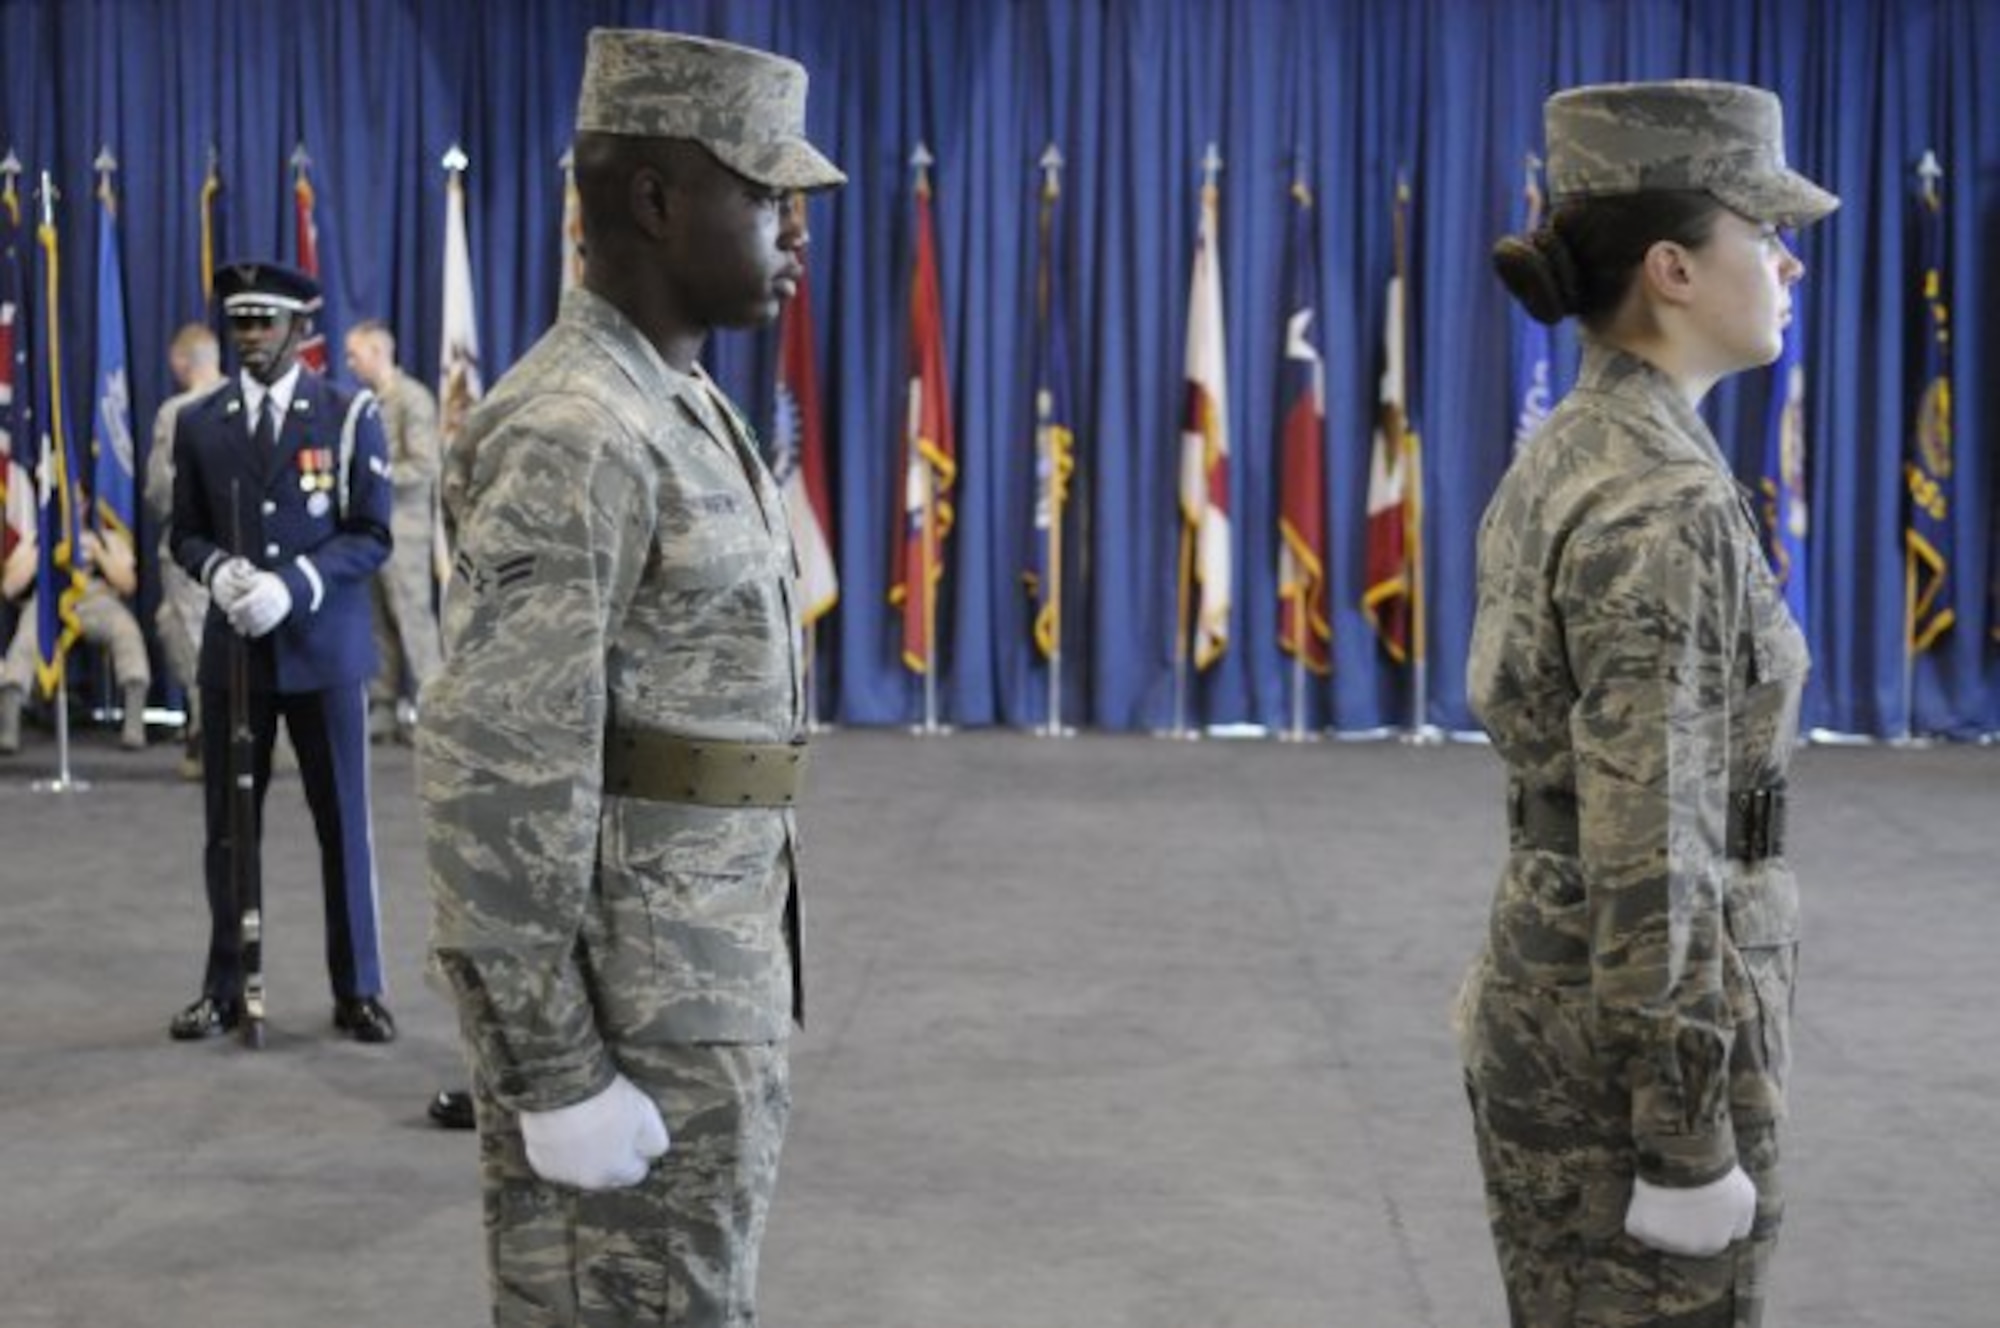 U.S. Air Force Airman 1st Class Roger D. Ruffin, and Airman Basic Tabatha Zimmer, United States Air Force Honor Guard technical school trainees, practice facing movements, Feb. 22, 2010, inside the Honor Guard's C Hall on Bolling Air Force Base, D.C. During the next eight weeks, trainees will learn what it takes to be a part of the USAF Honor Guard. (U.S. Air Force photo by Senior Airman Marleah Miller)